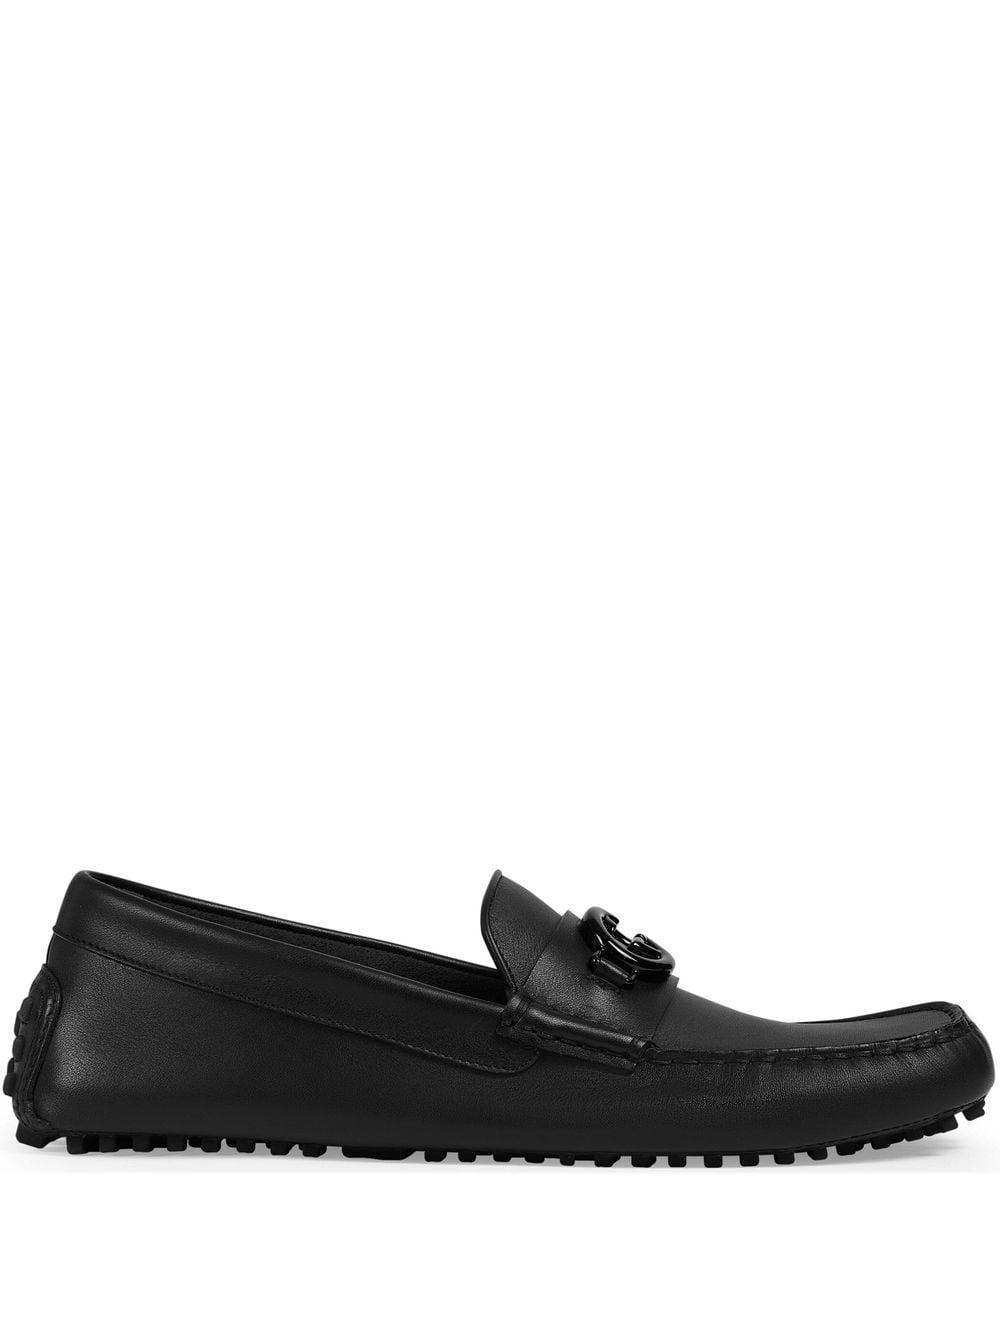 Gucci Leather GG-motif Driver Moccasins in Black for Men | Lyst UK